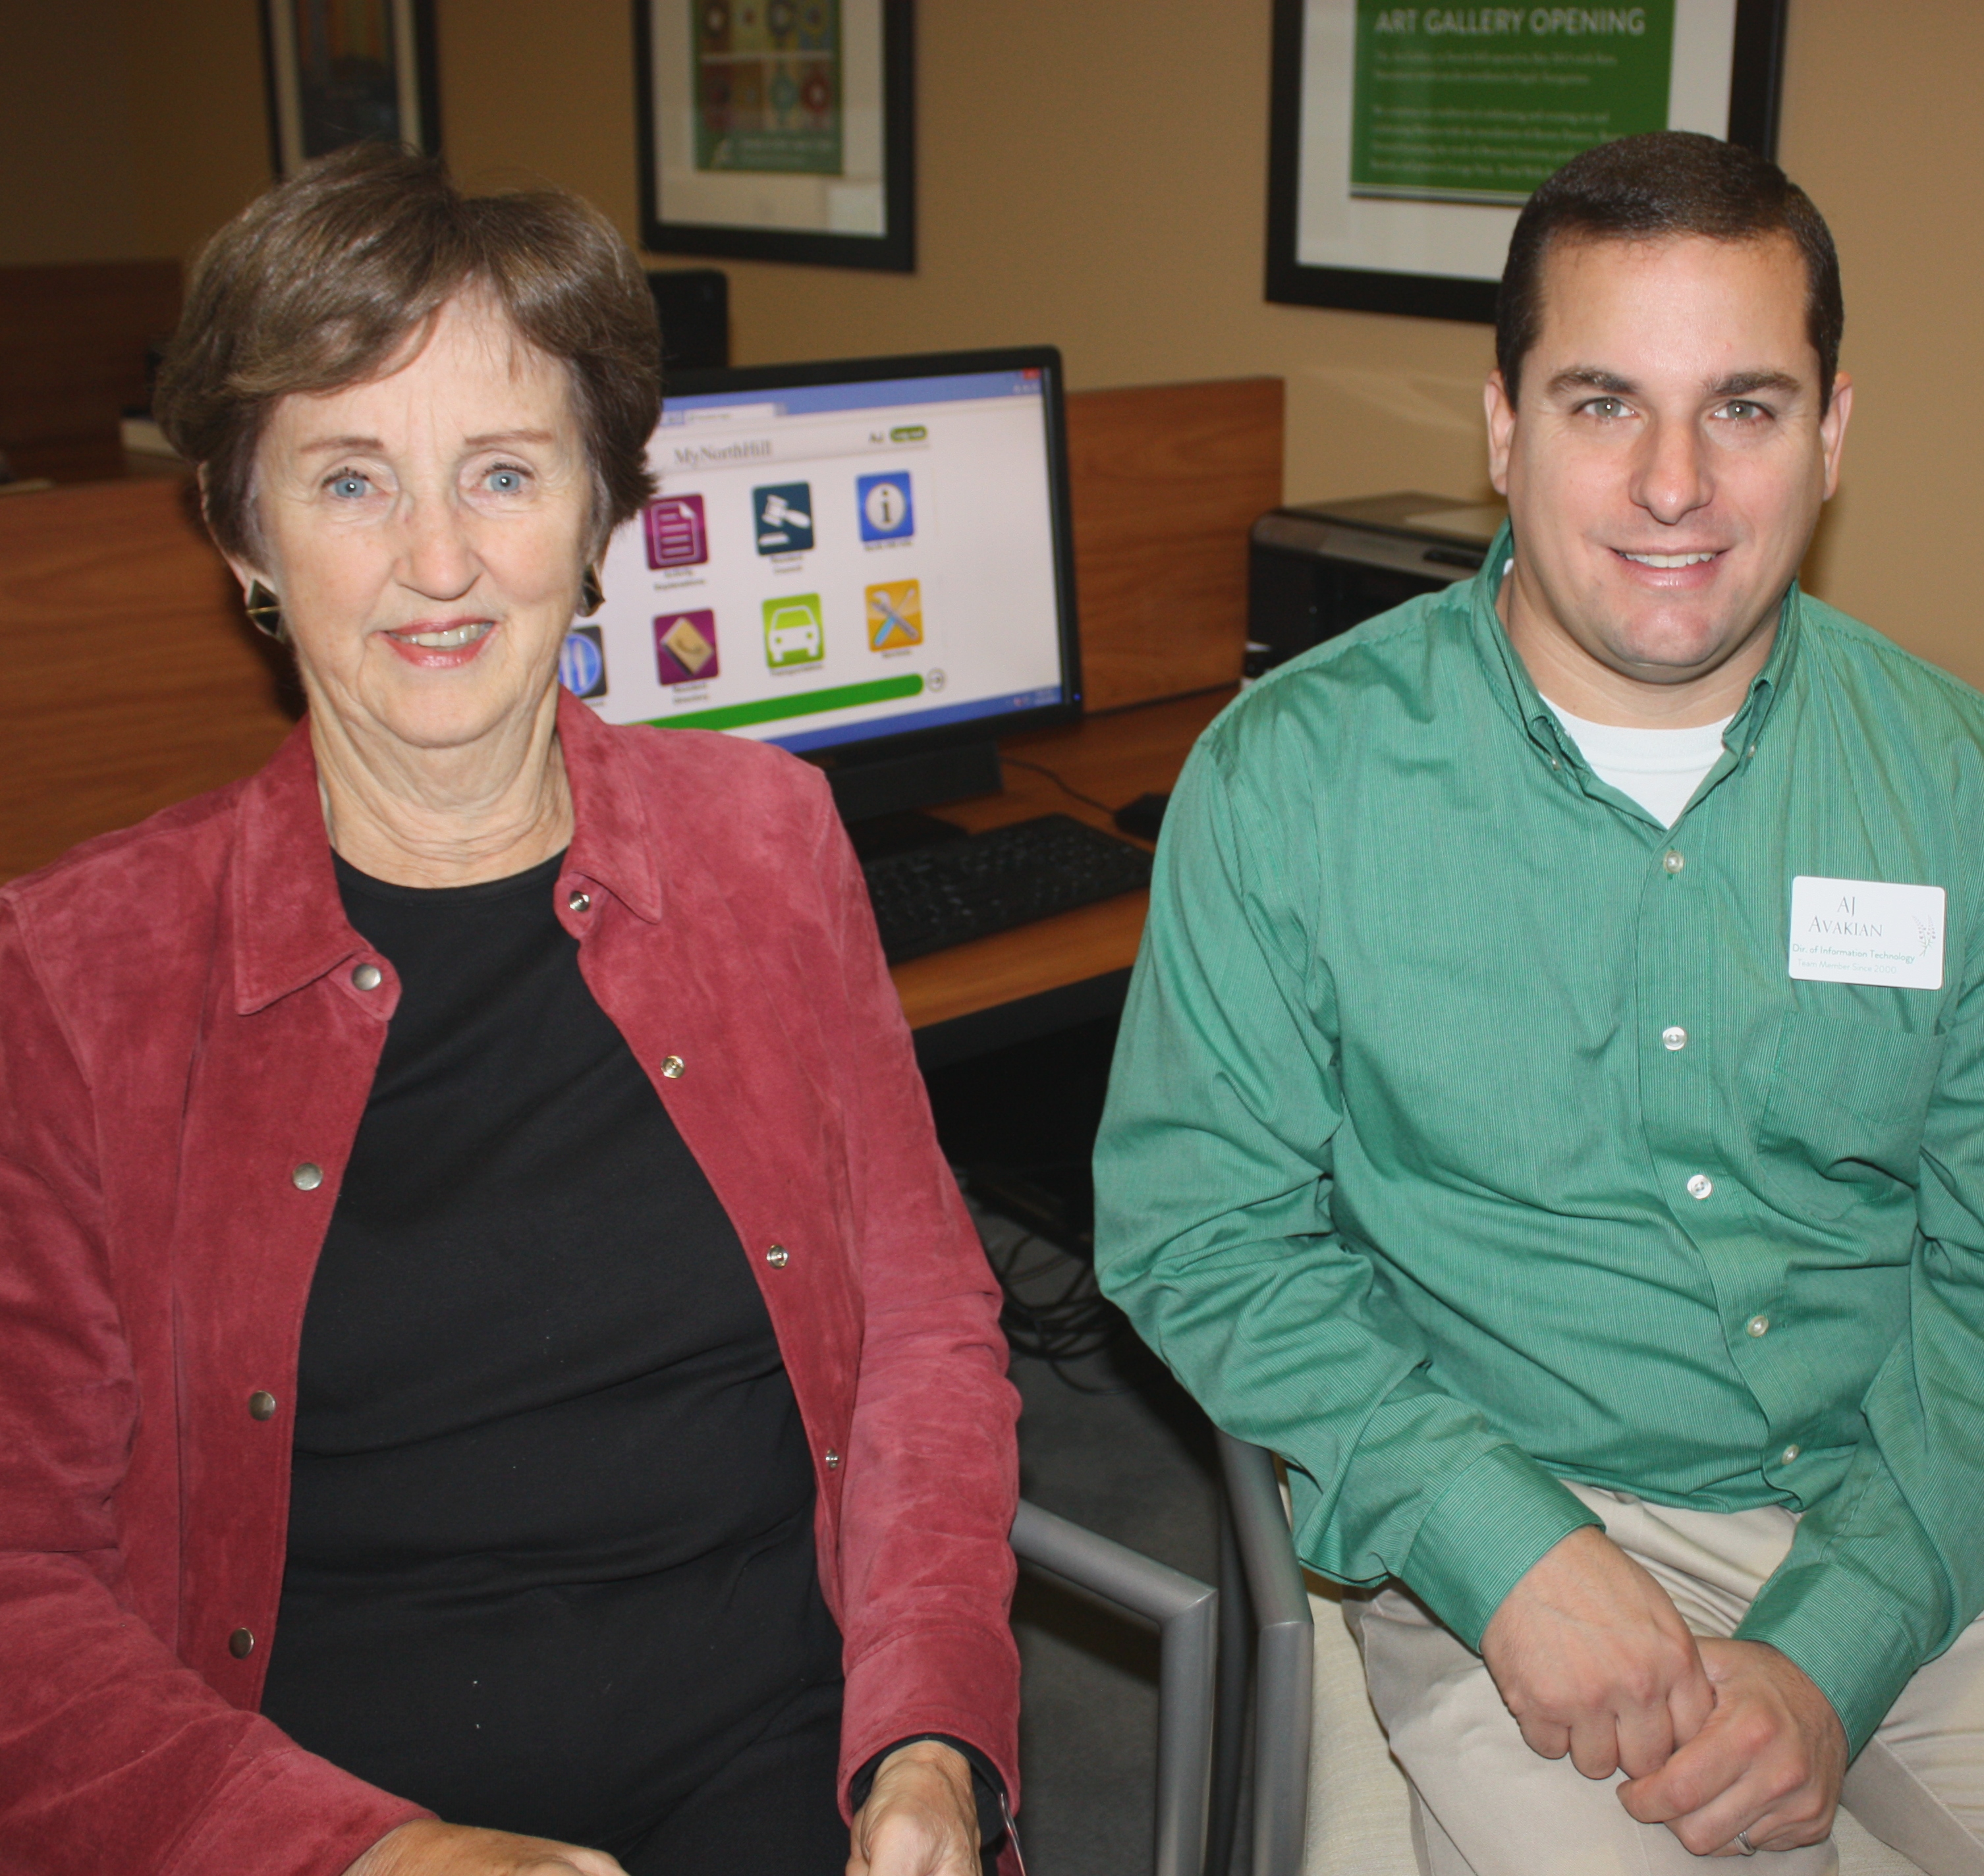 A North Hill resident, Rosemary Pierson, working with AJ Avakian, IT Director at North Hill, spearheaded this initiative to implement Touchtown's senior-friendly solution.